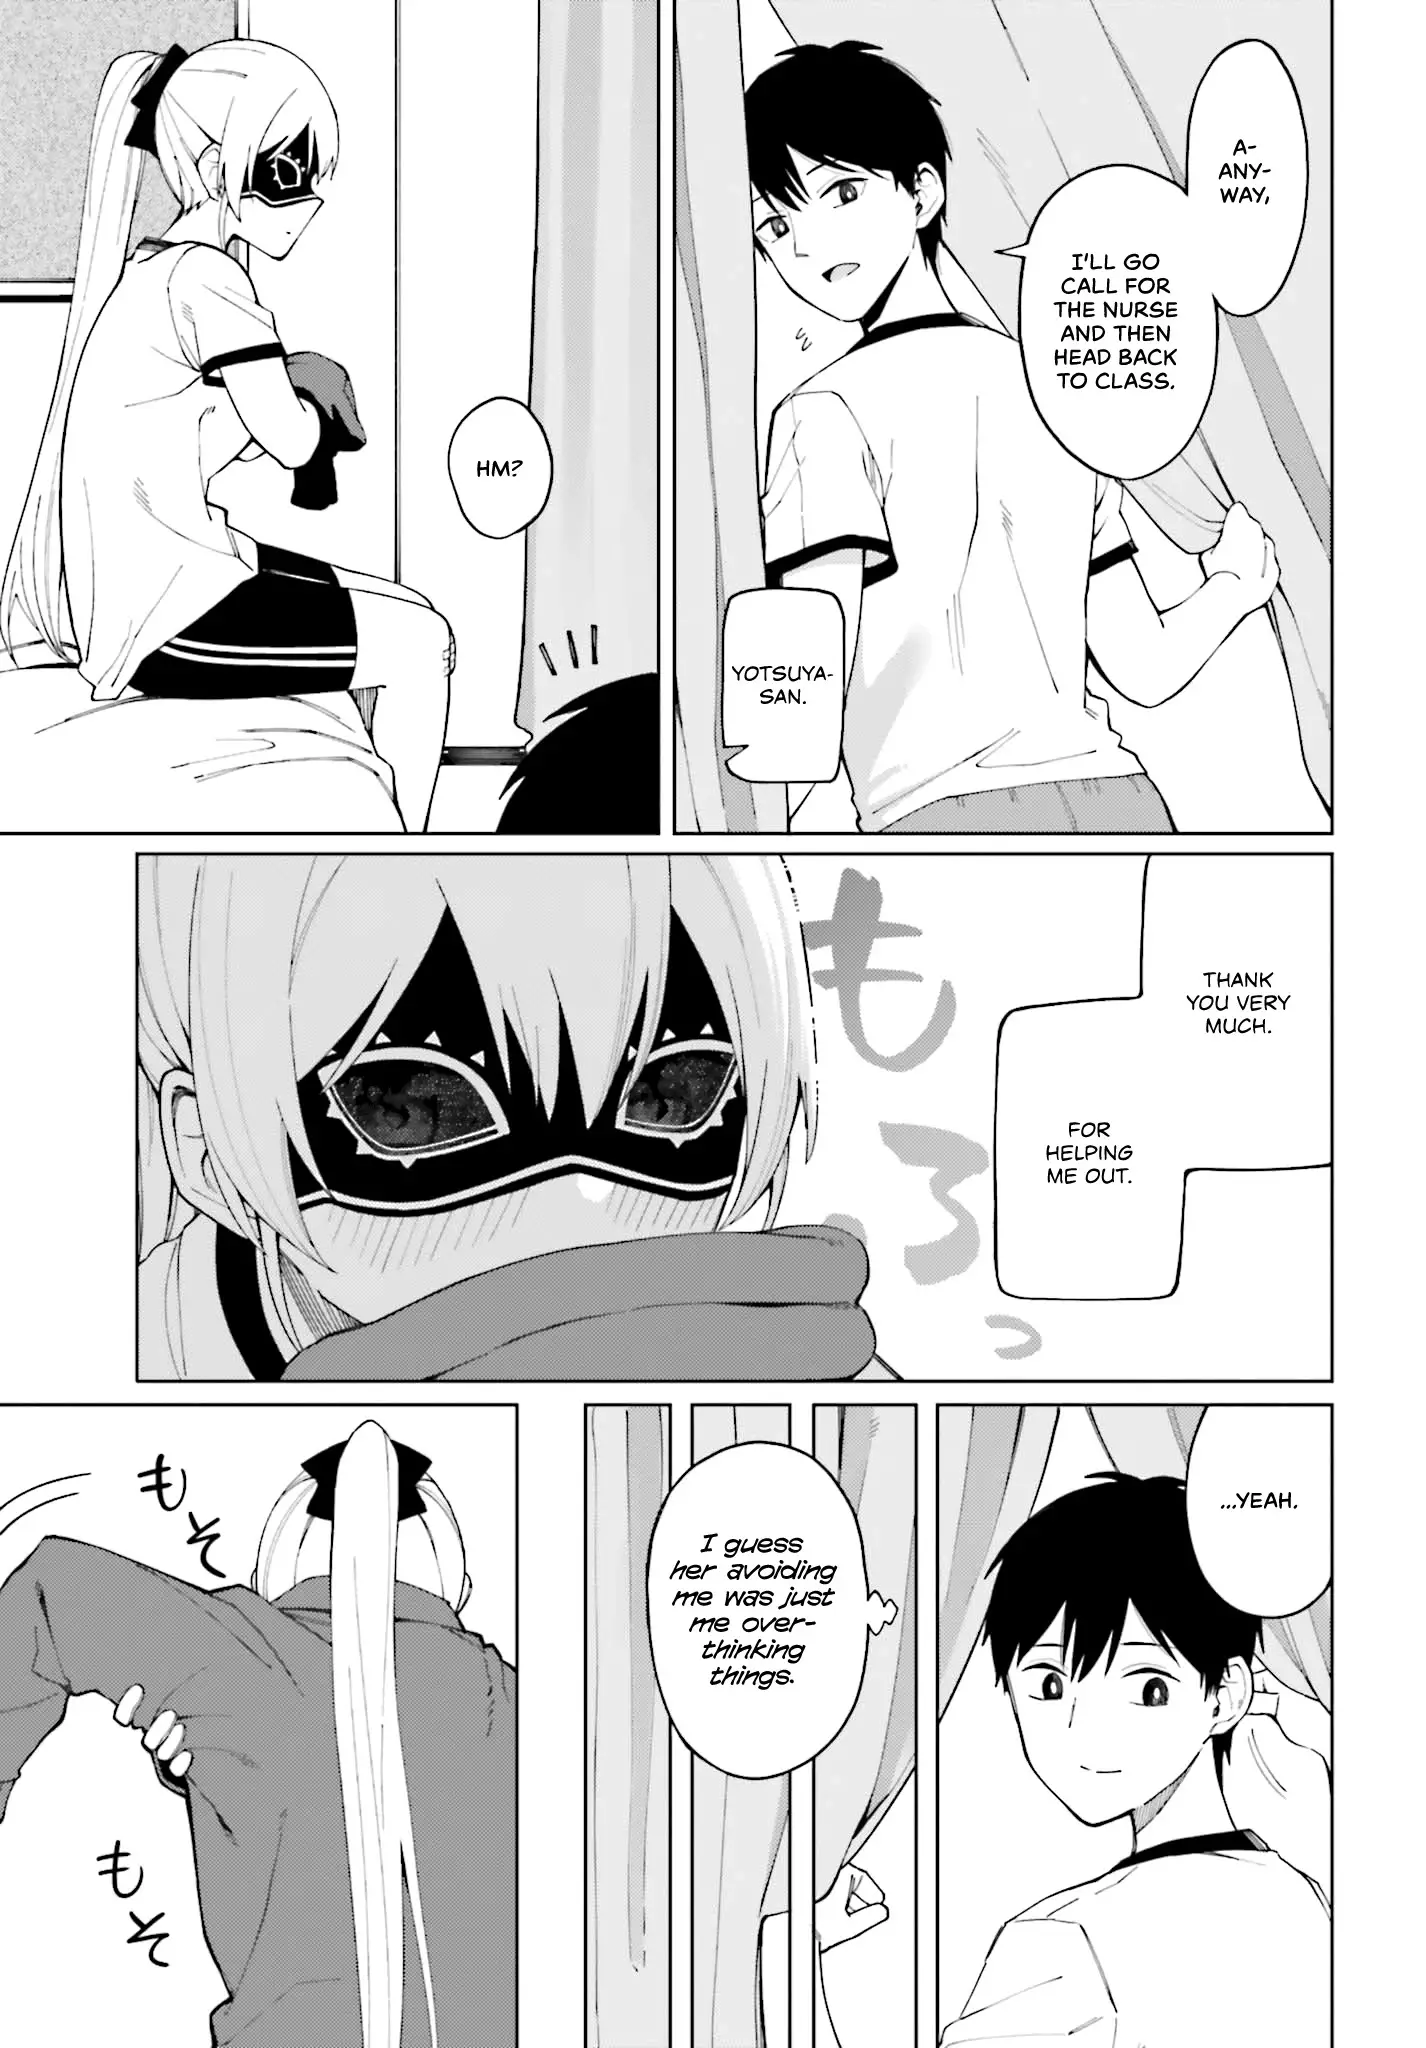 I Don't Understand Shirogane-San's Facial Expression At All - 2 page 21